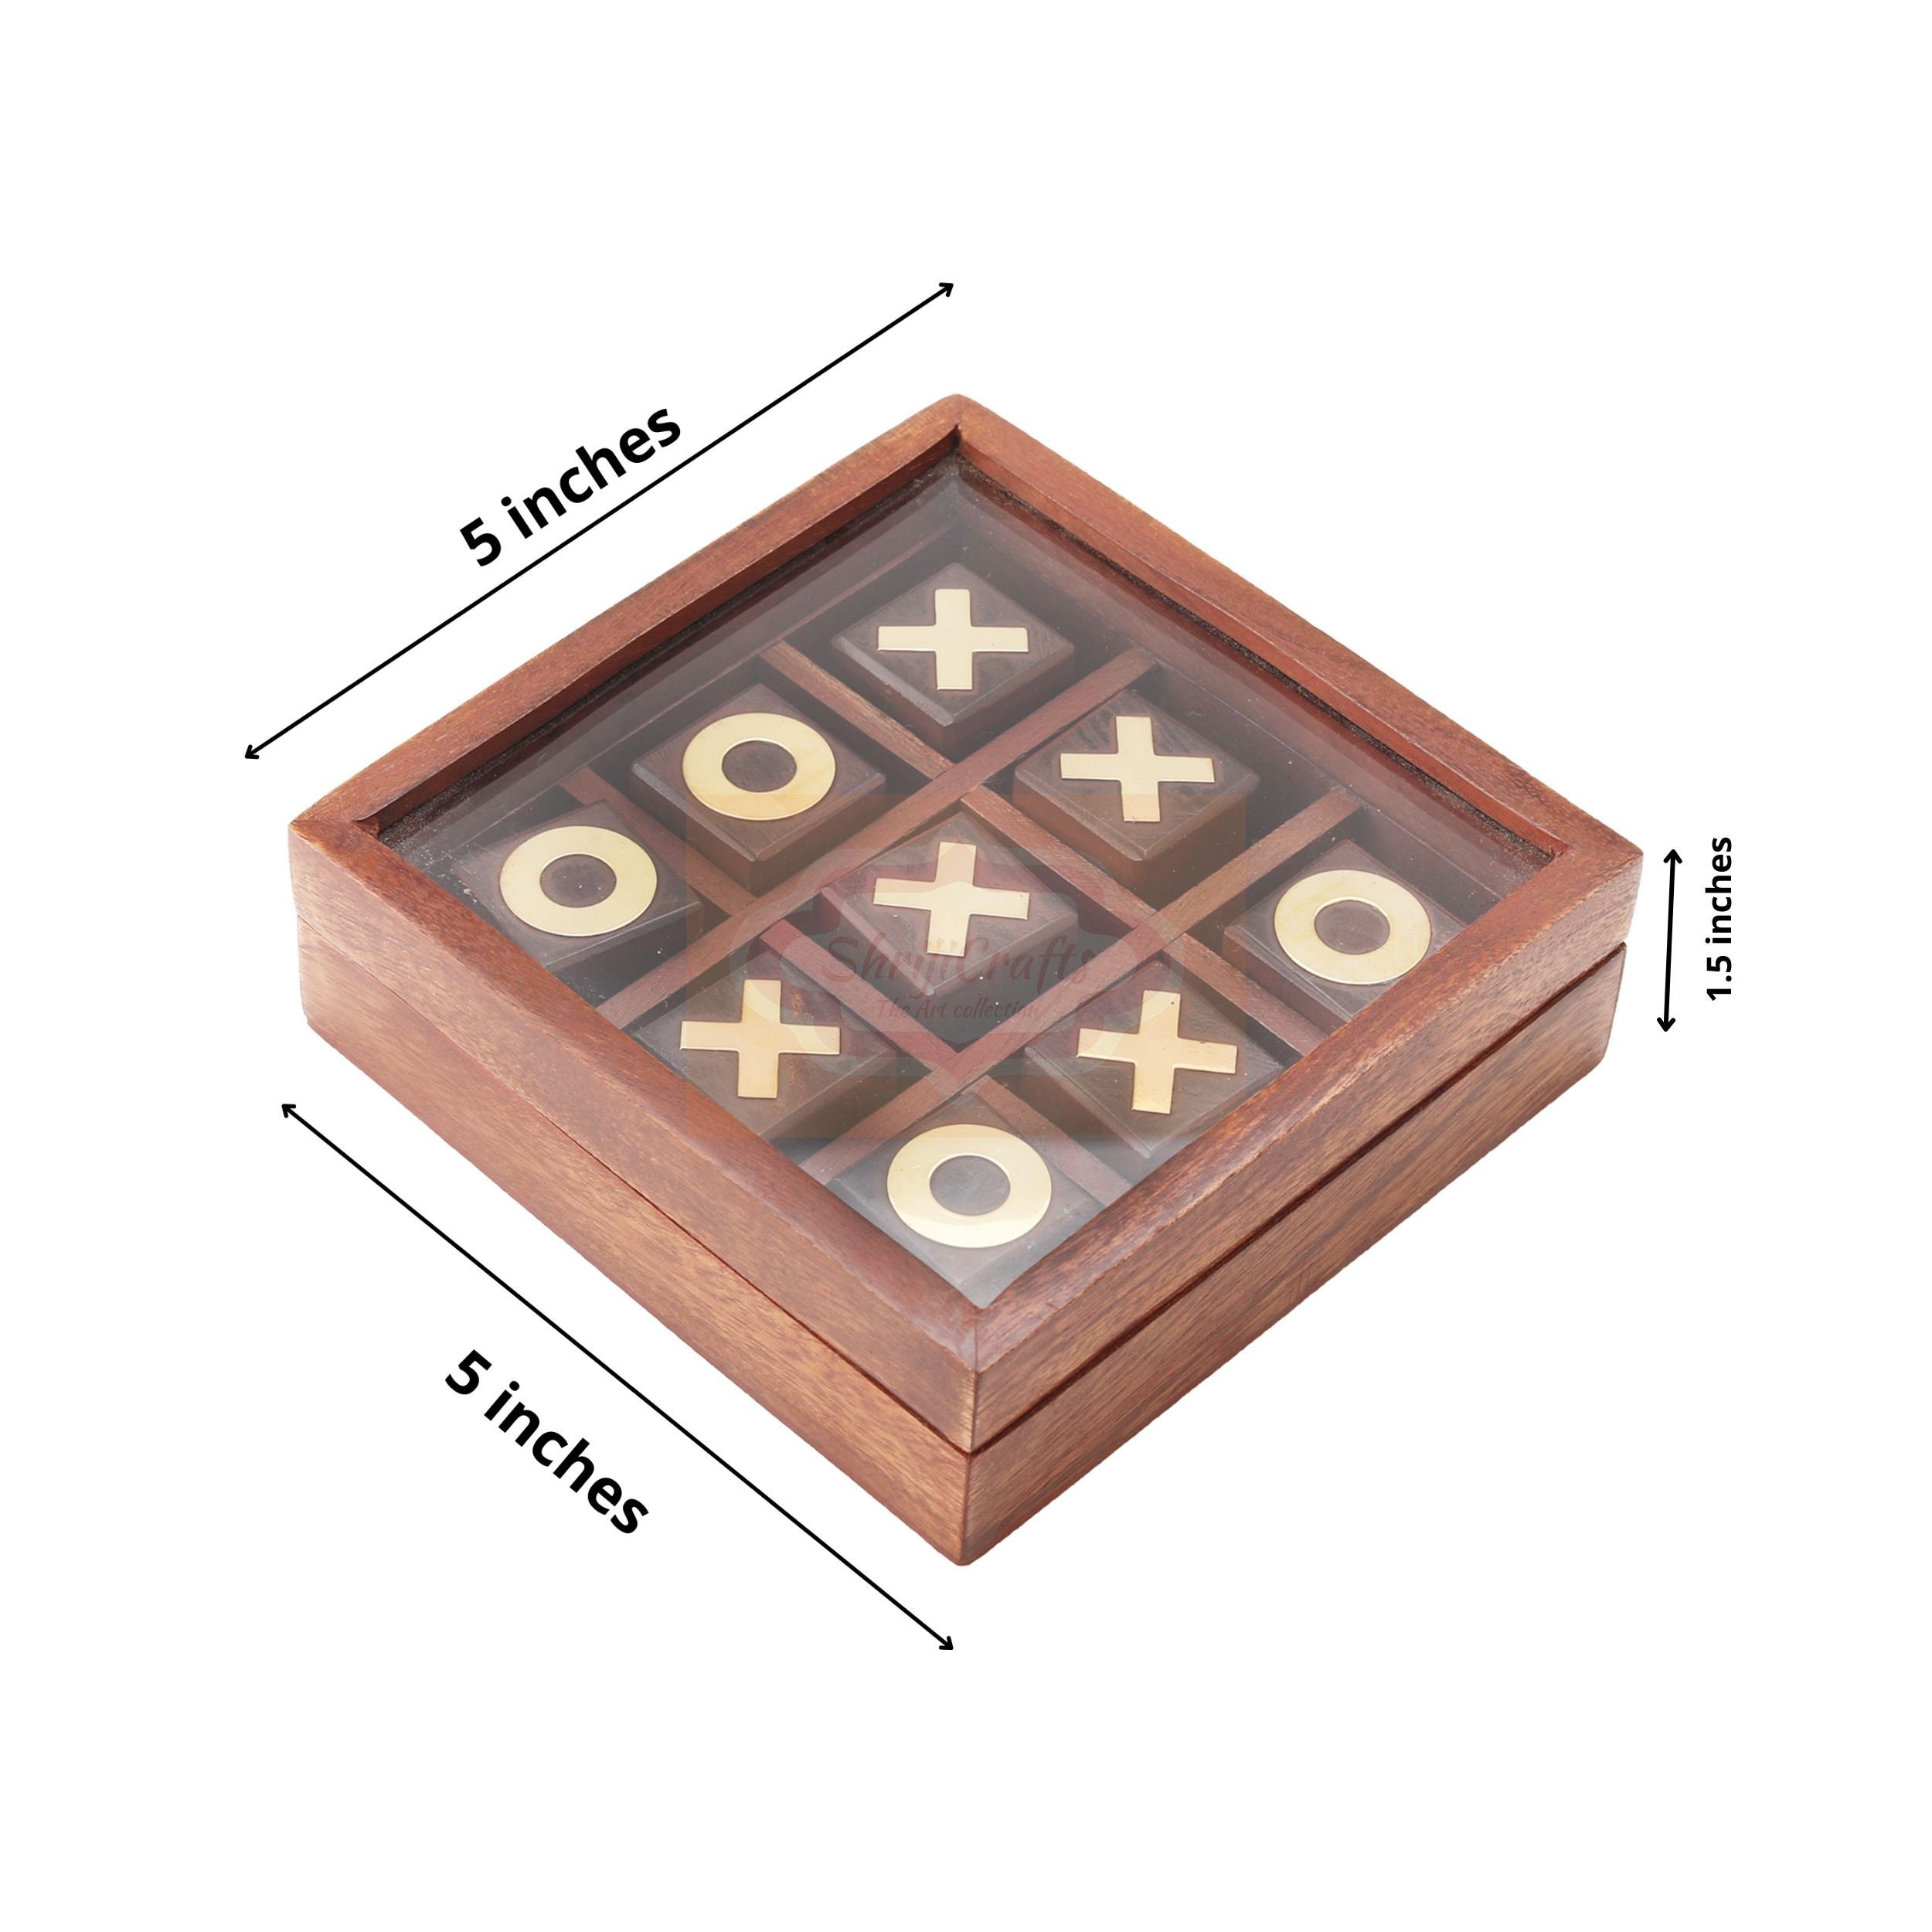 Buy FRAYO Brand Wooden Tic Tac Toe and Solitaire Board Game, Traditional  Challenging Board Game for Kids and Adults (Weight: 480 Gm) Online at Low  Prices in India 